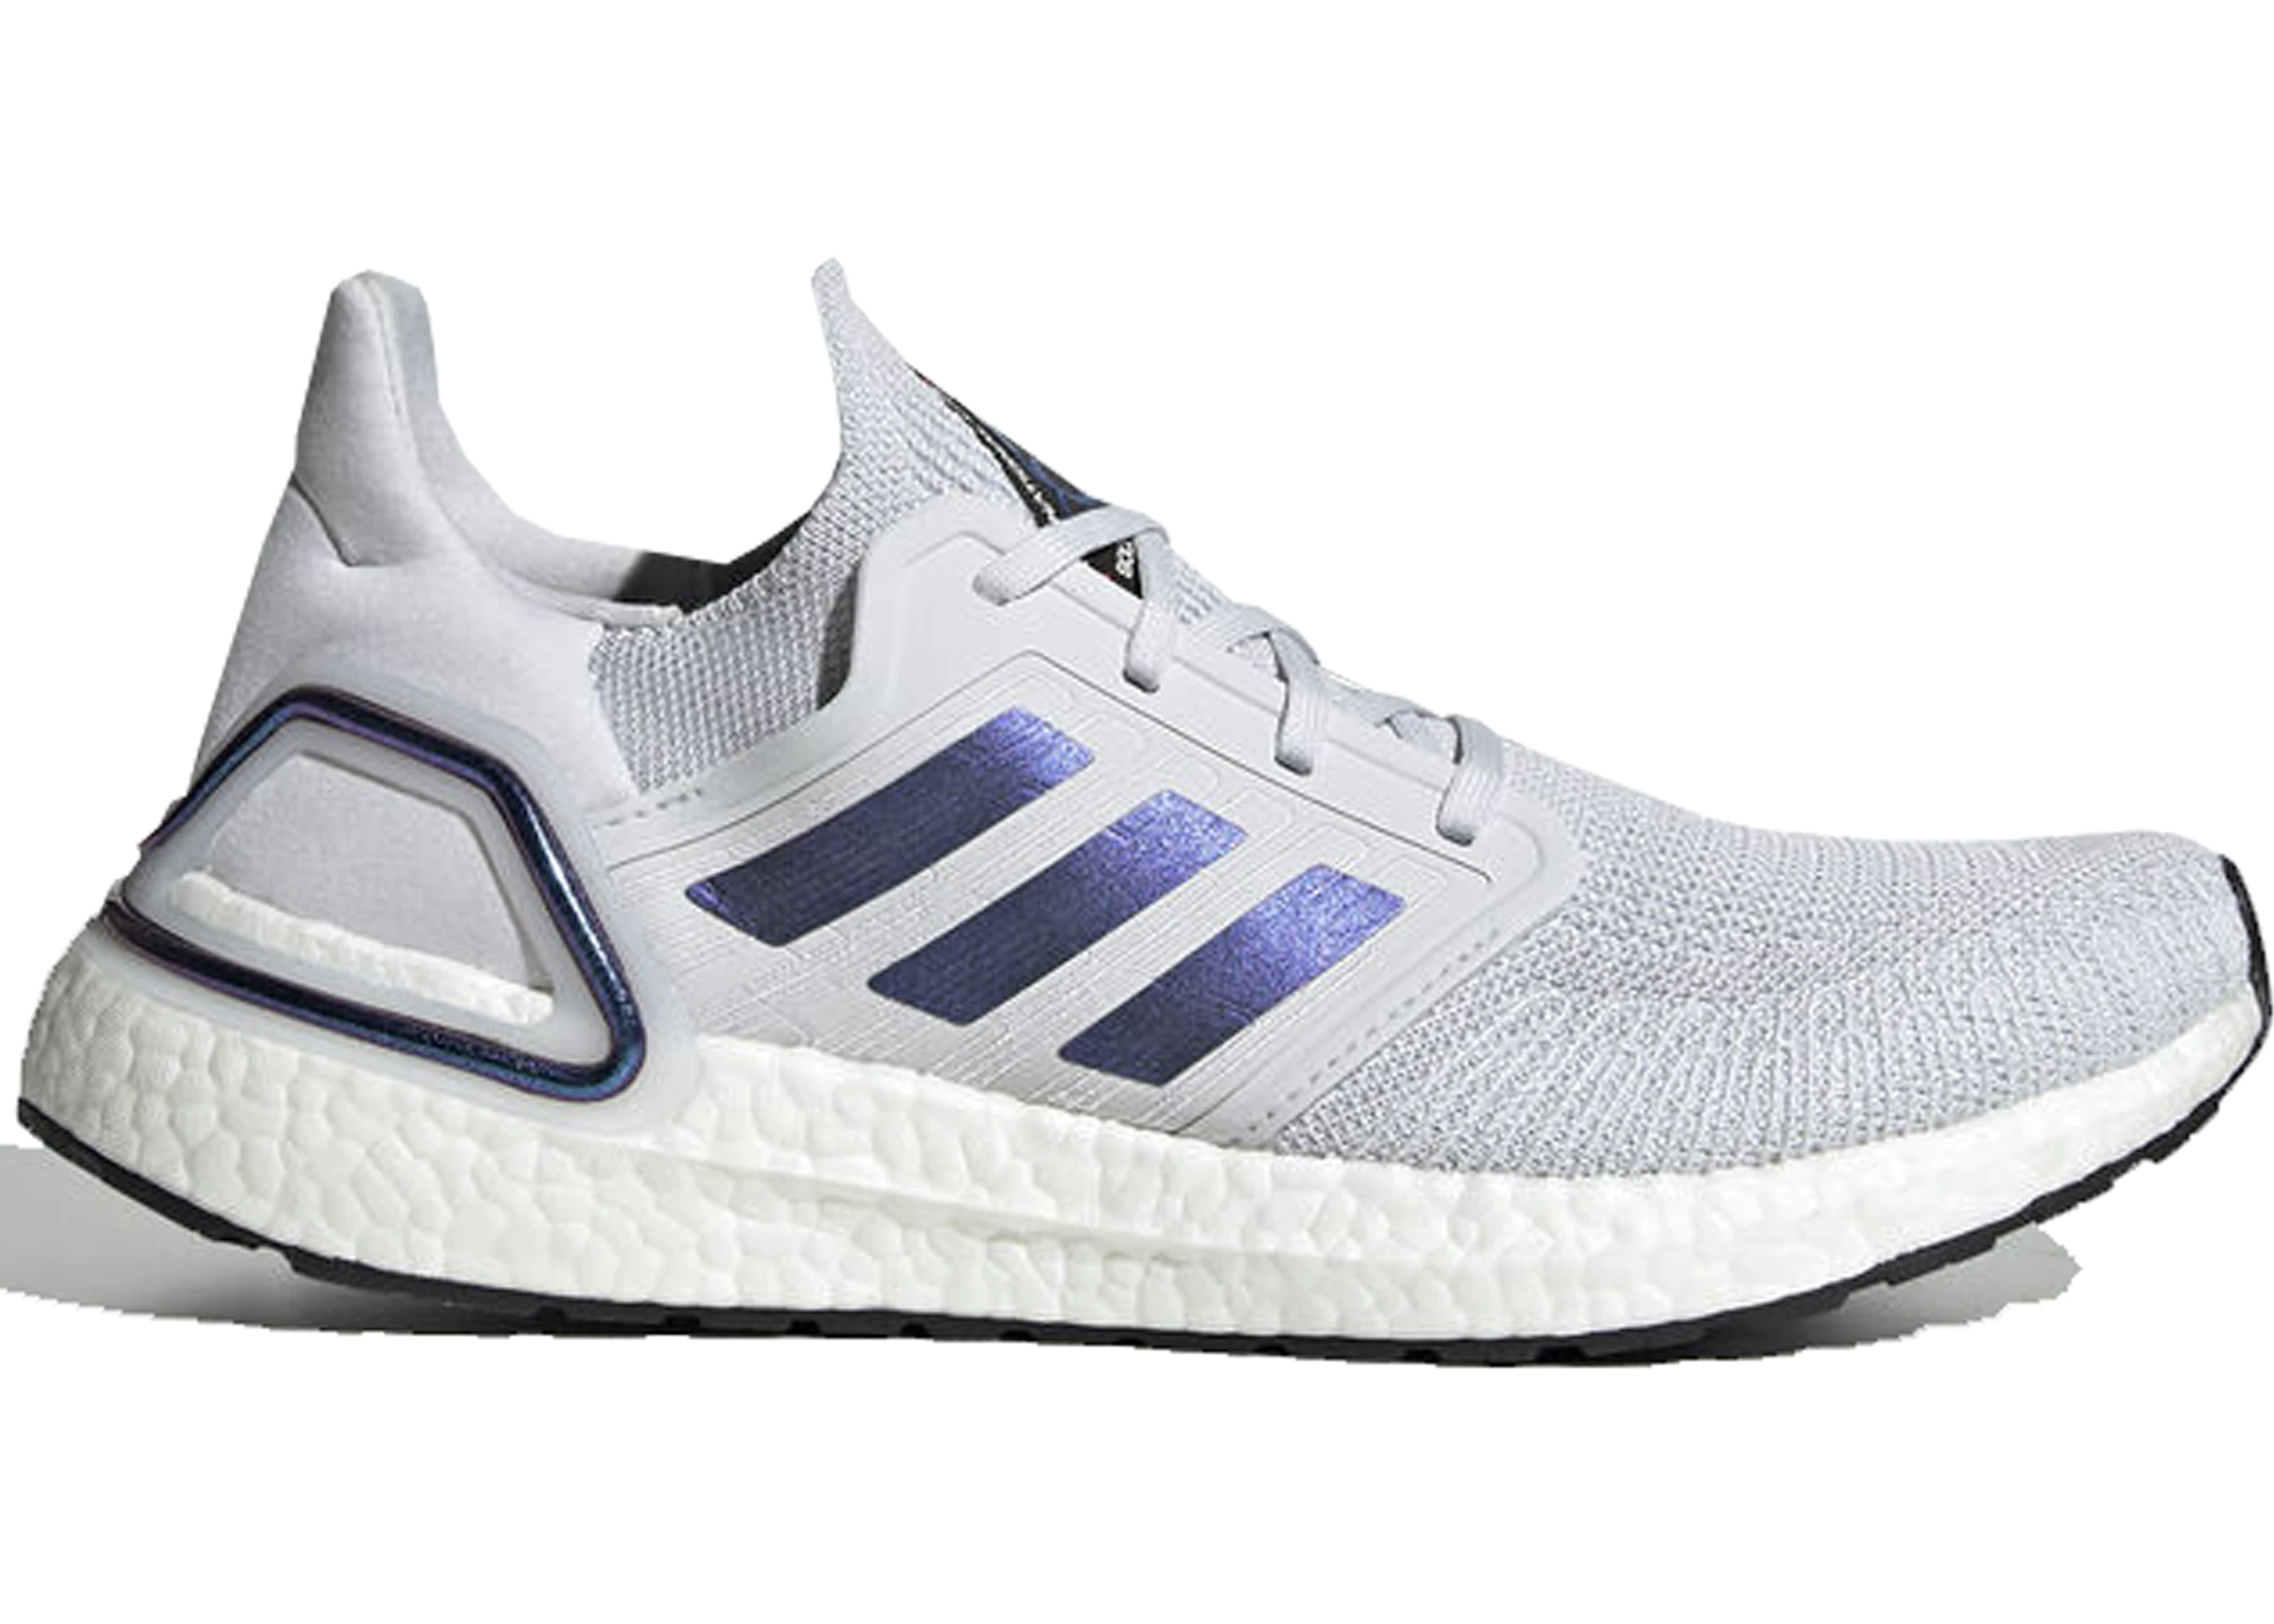 Grit micro Dormancy Buy adidas Ultra Boost 20 Shoes & New Sneakers - StockX